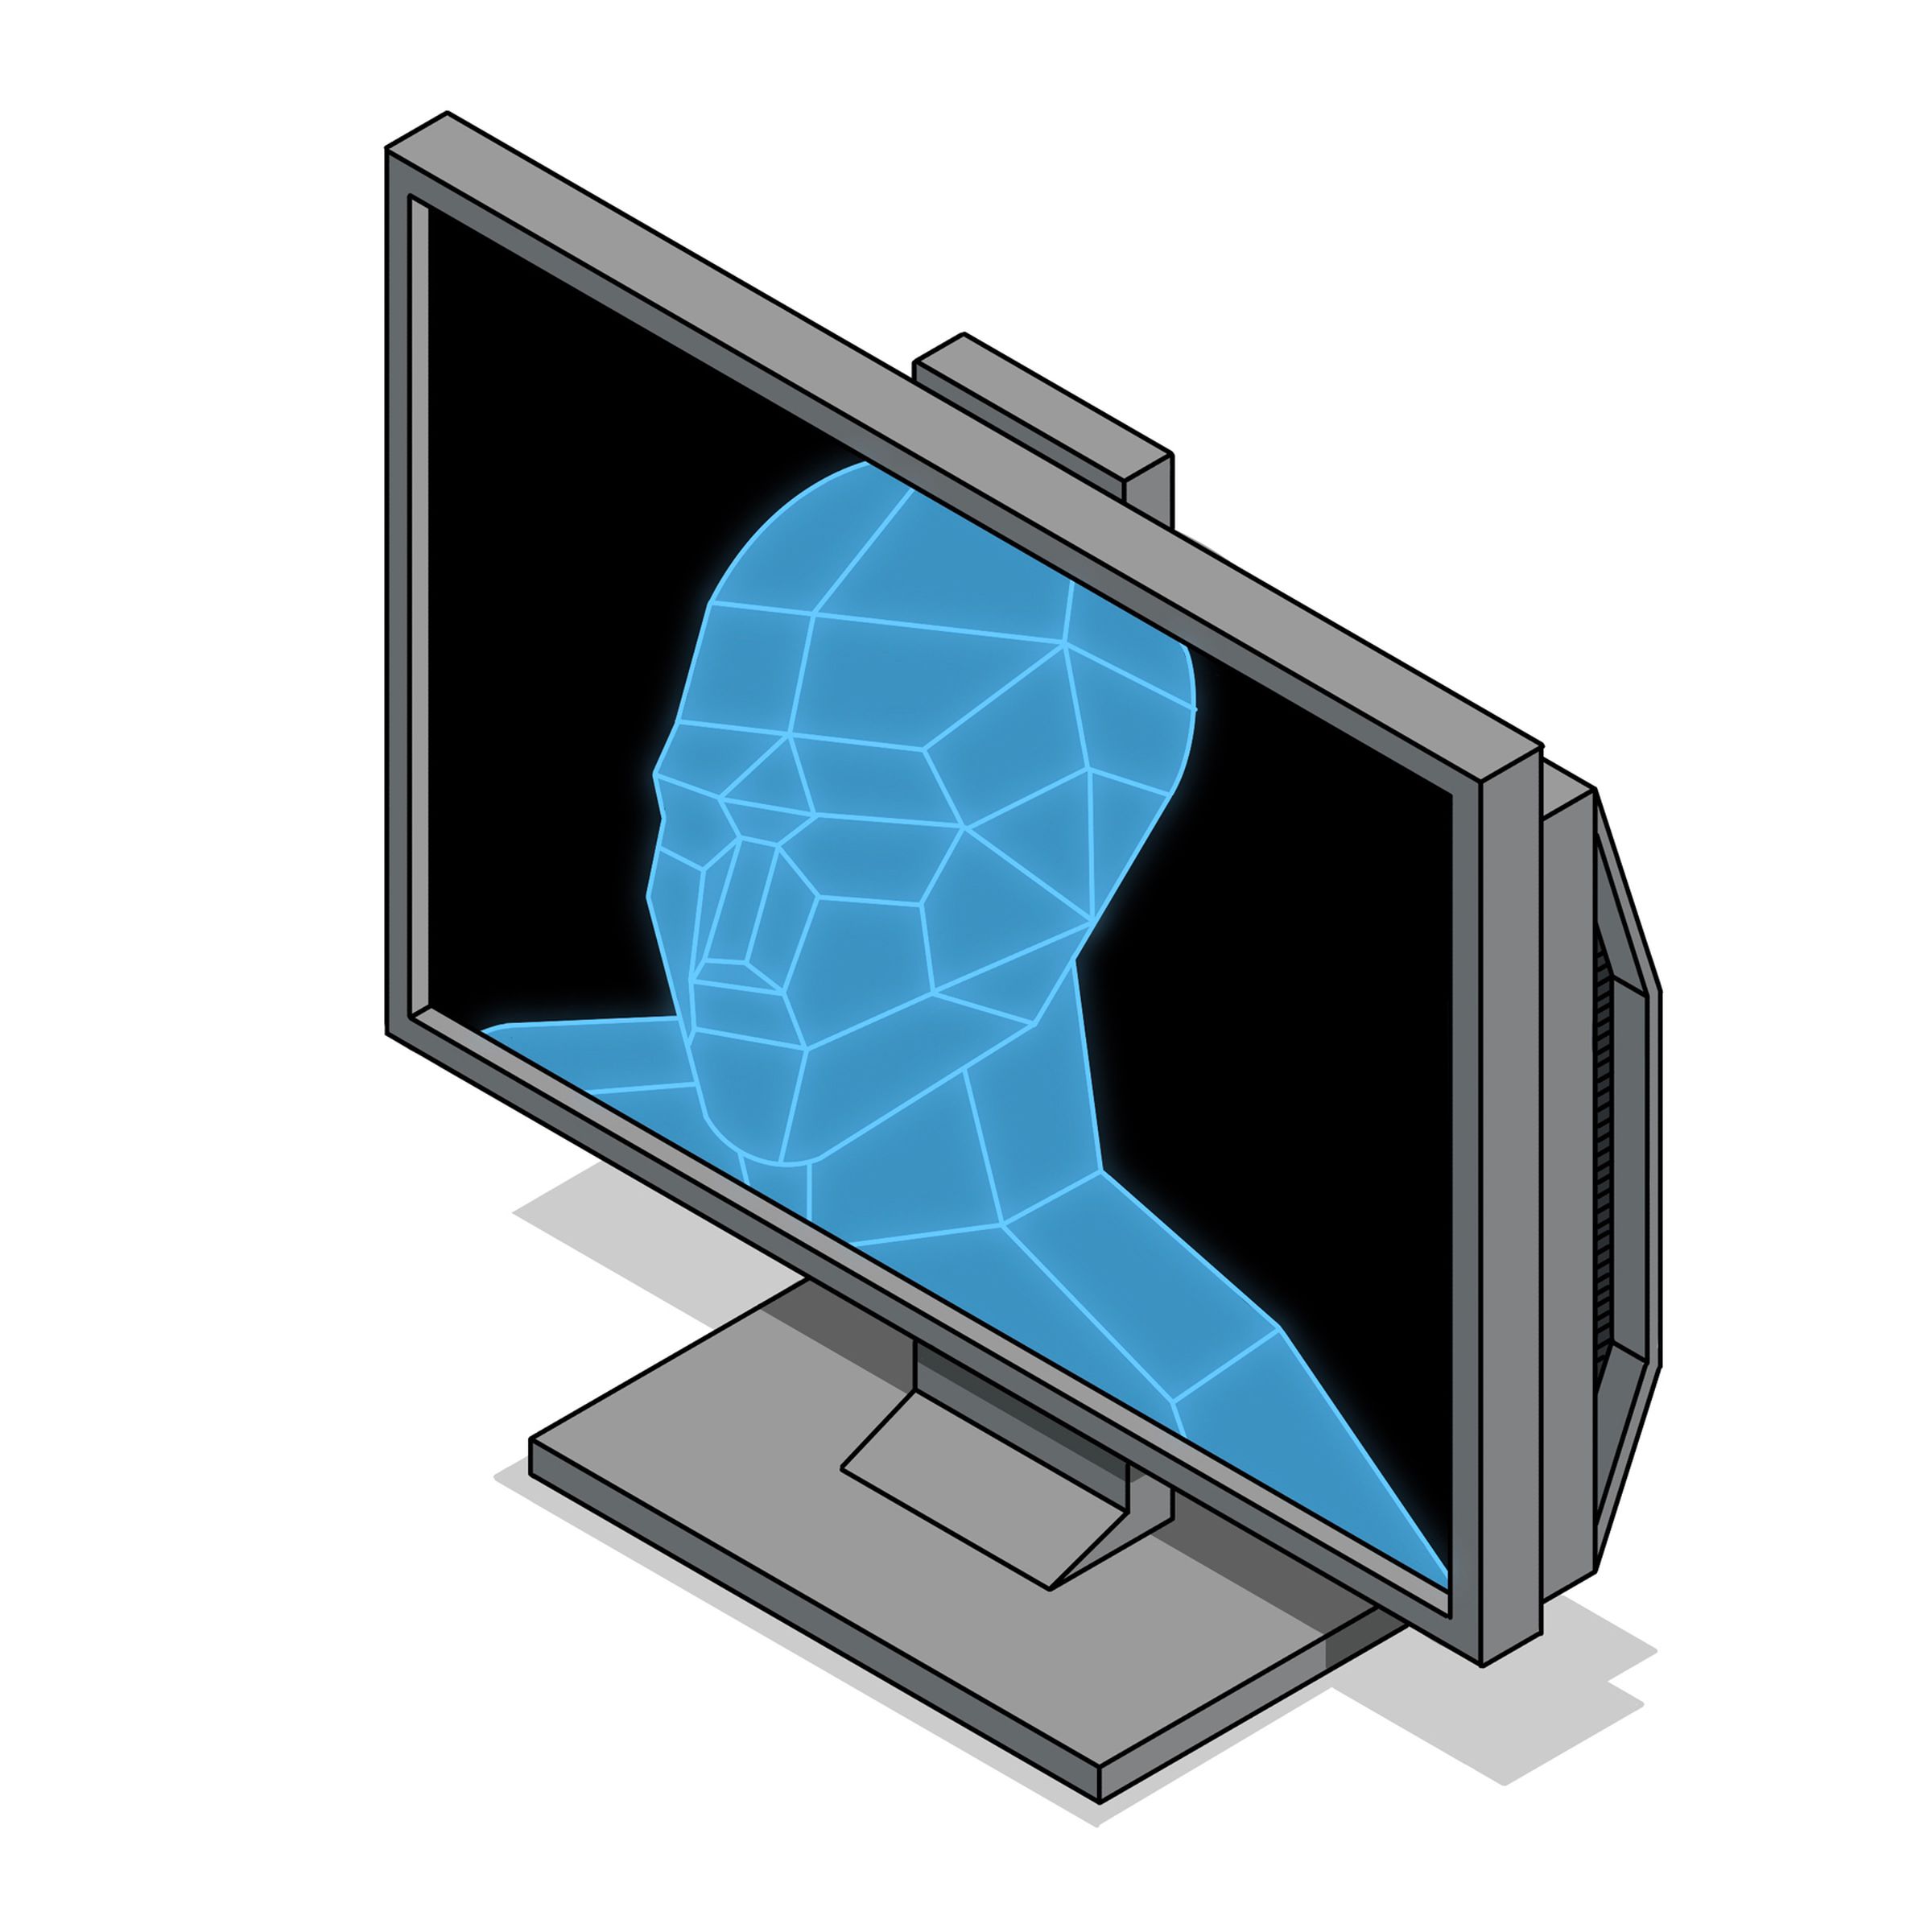 Illustration of wireframe figure inside a computer monitor.